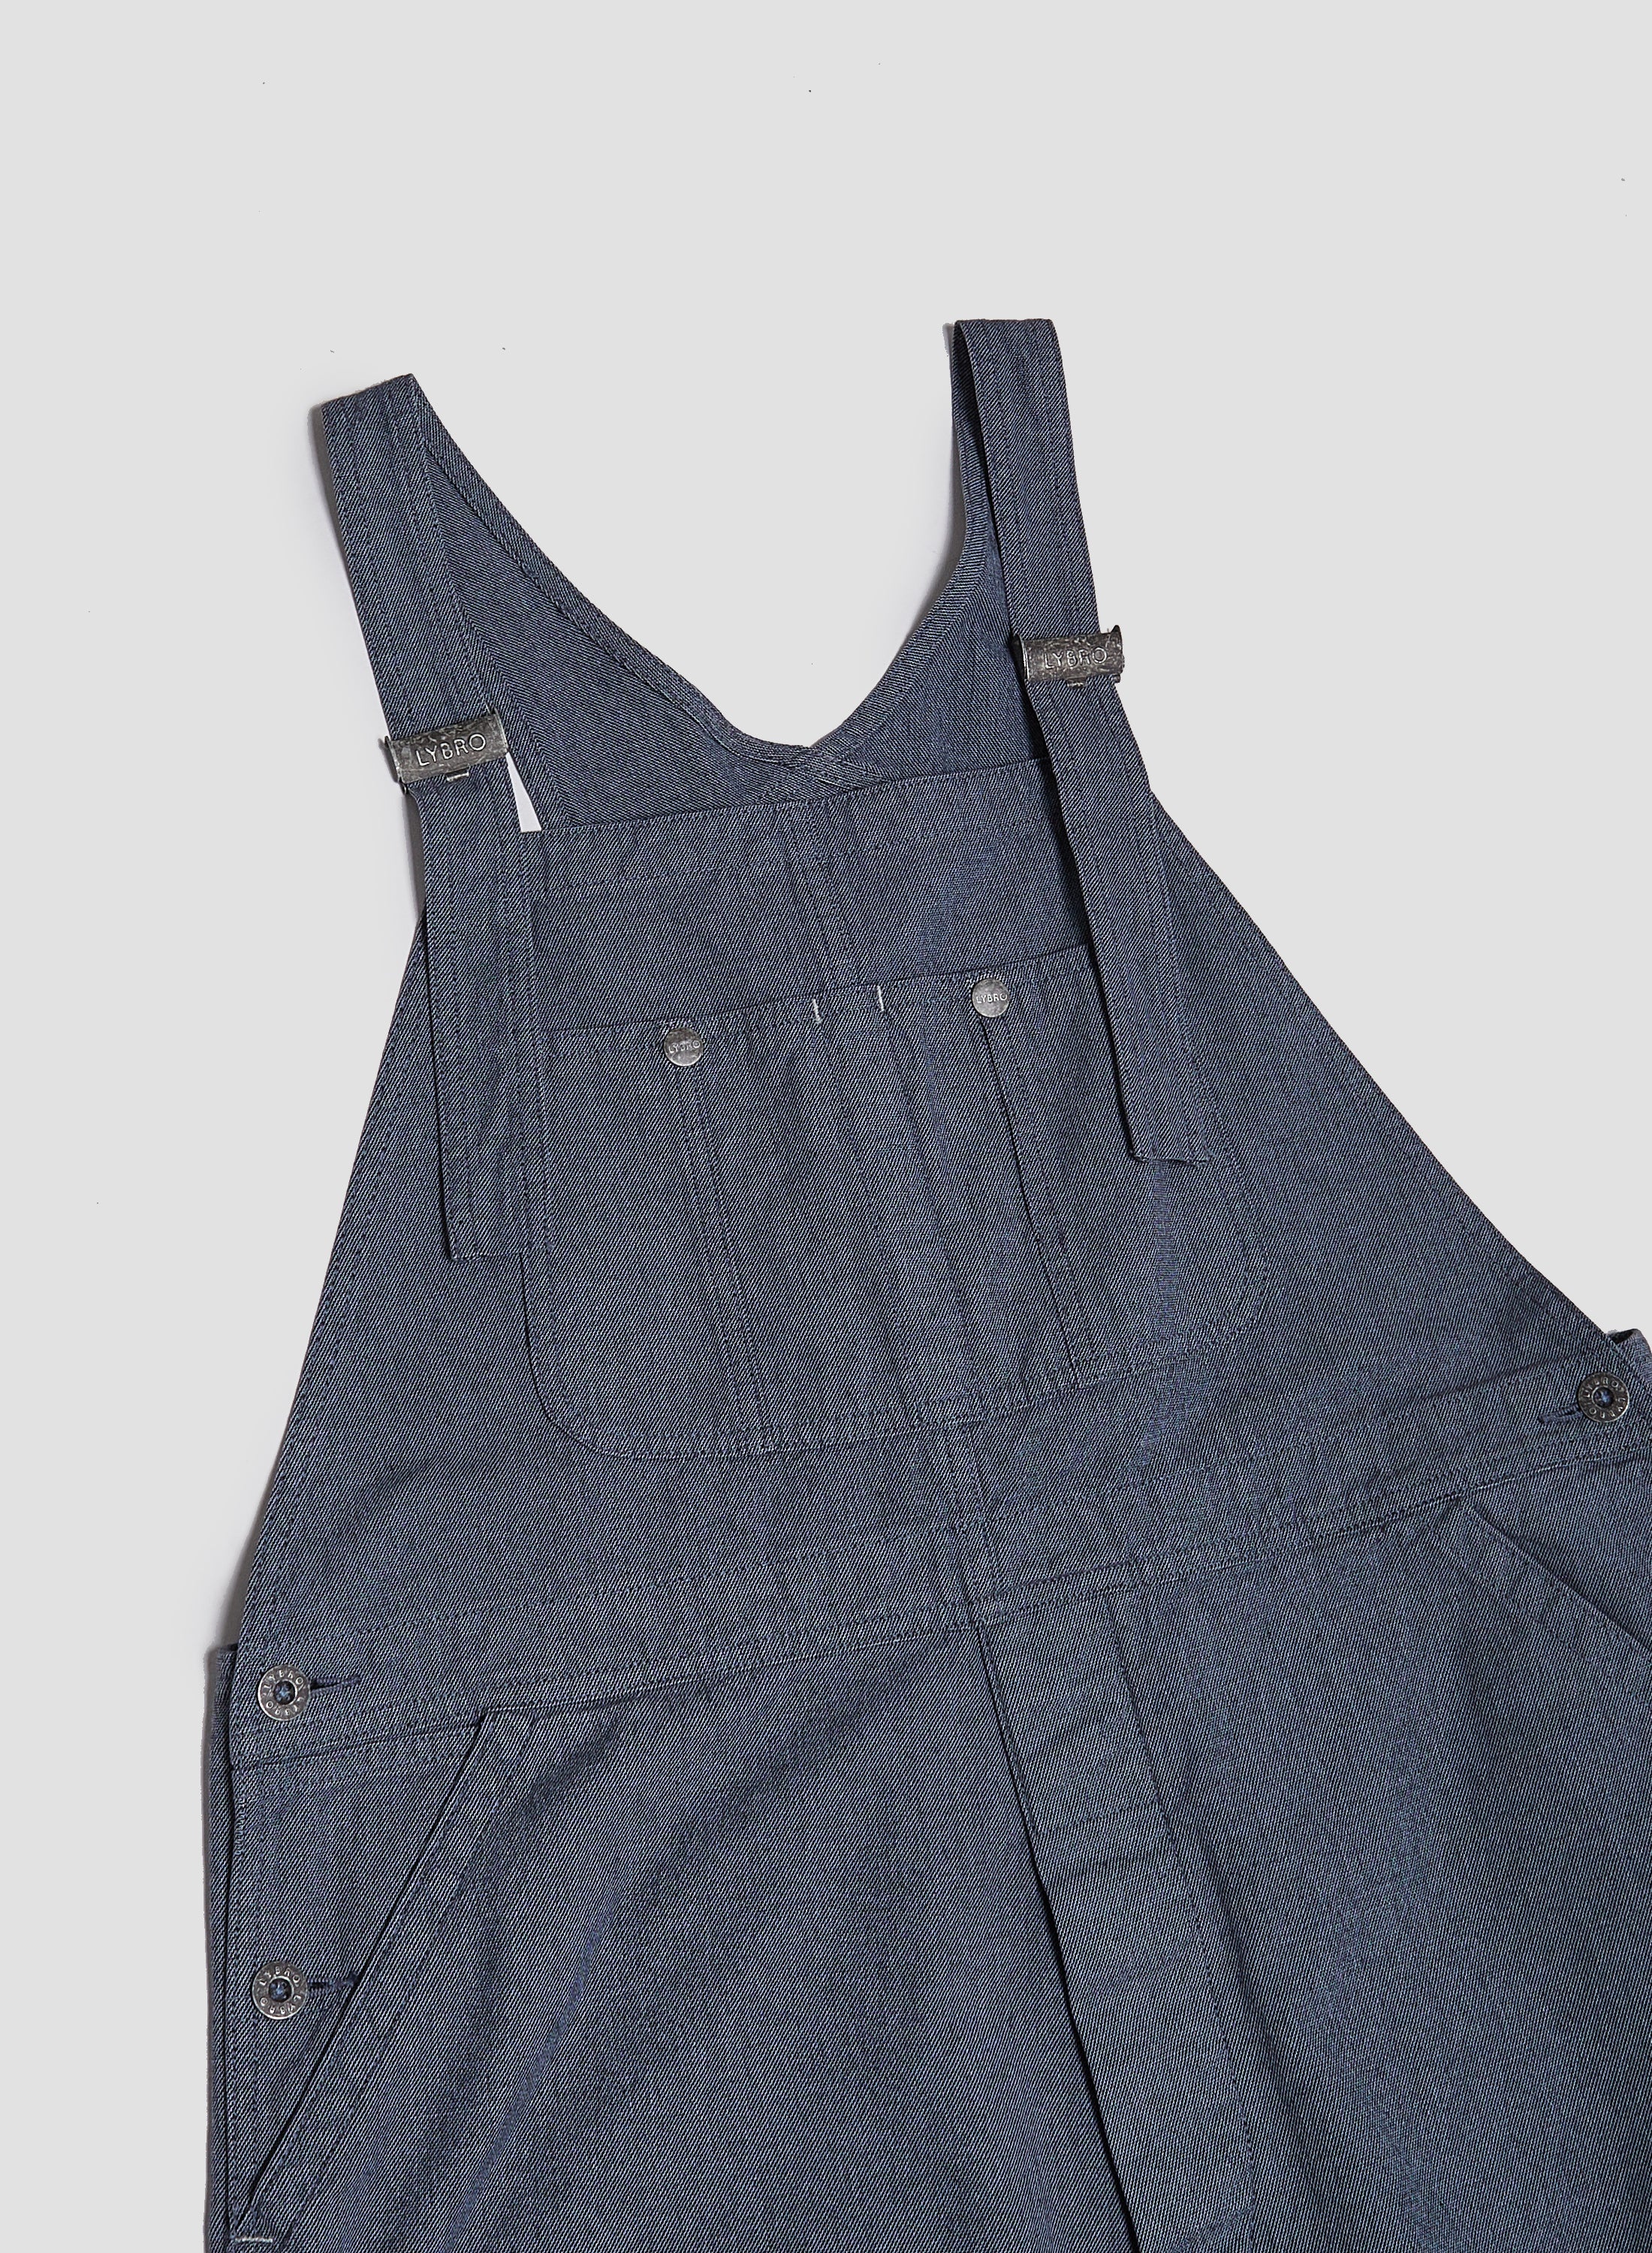 New Dungaree Broken Twill in Washed Blue - 5